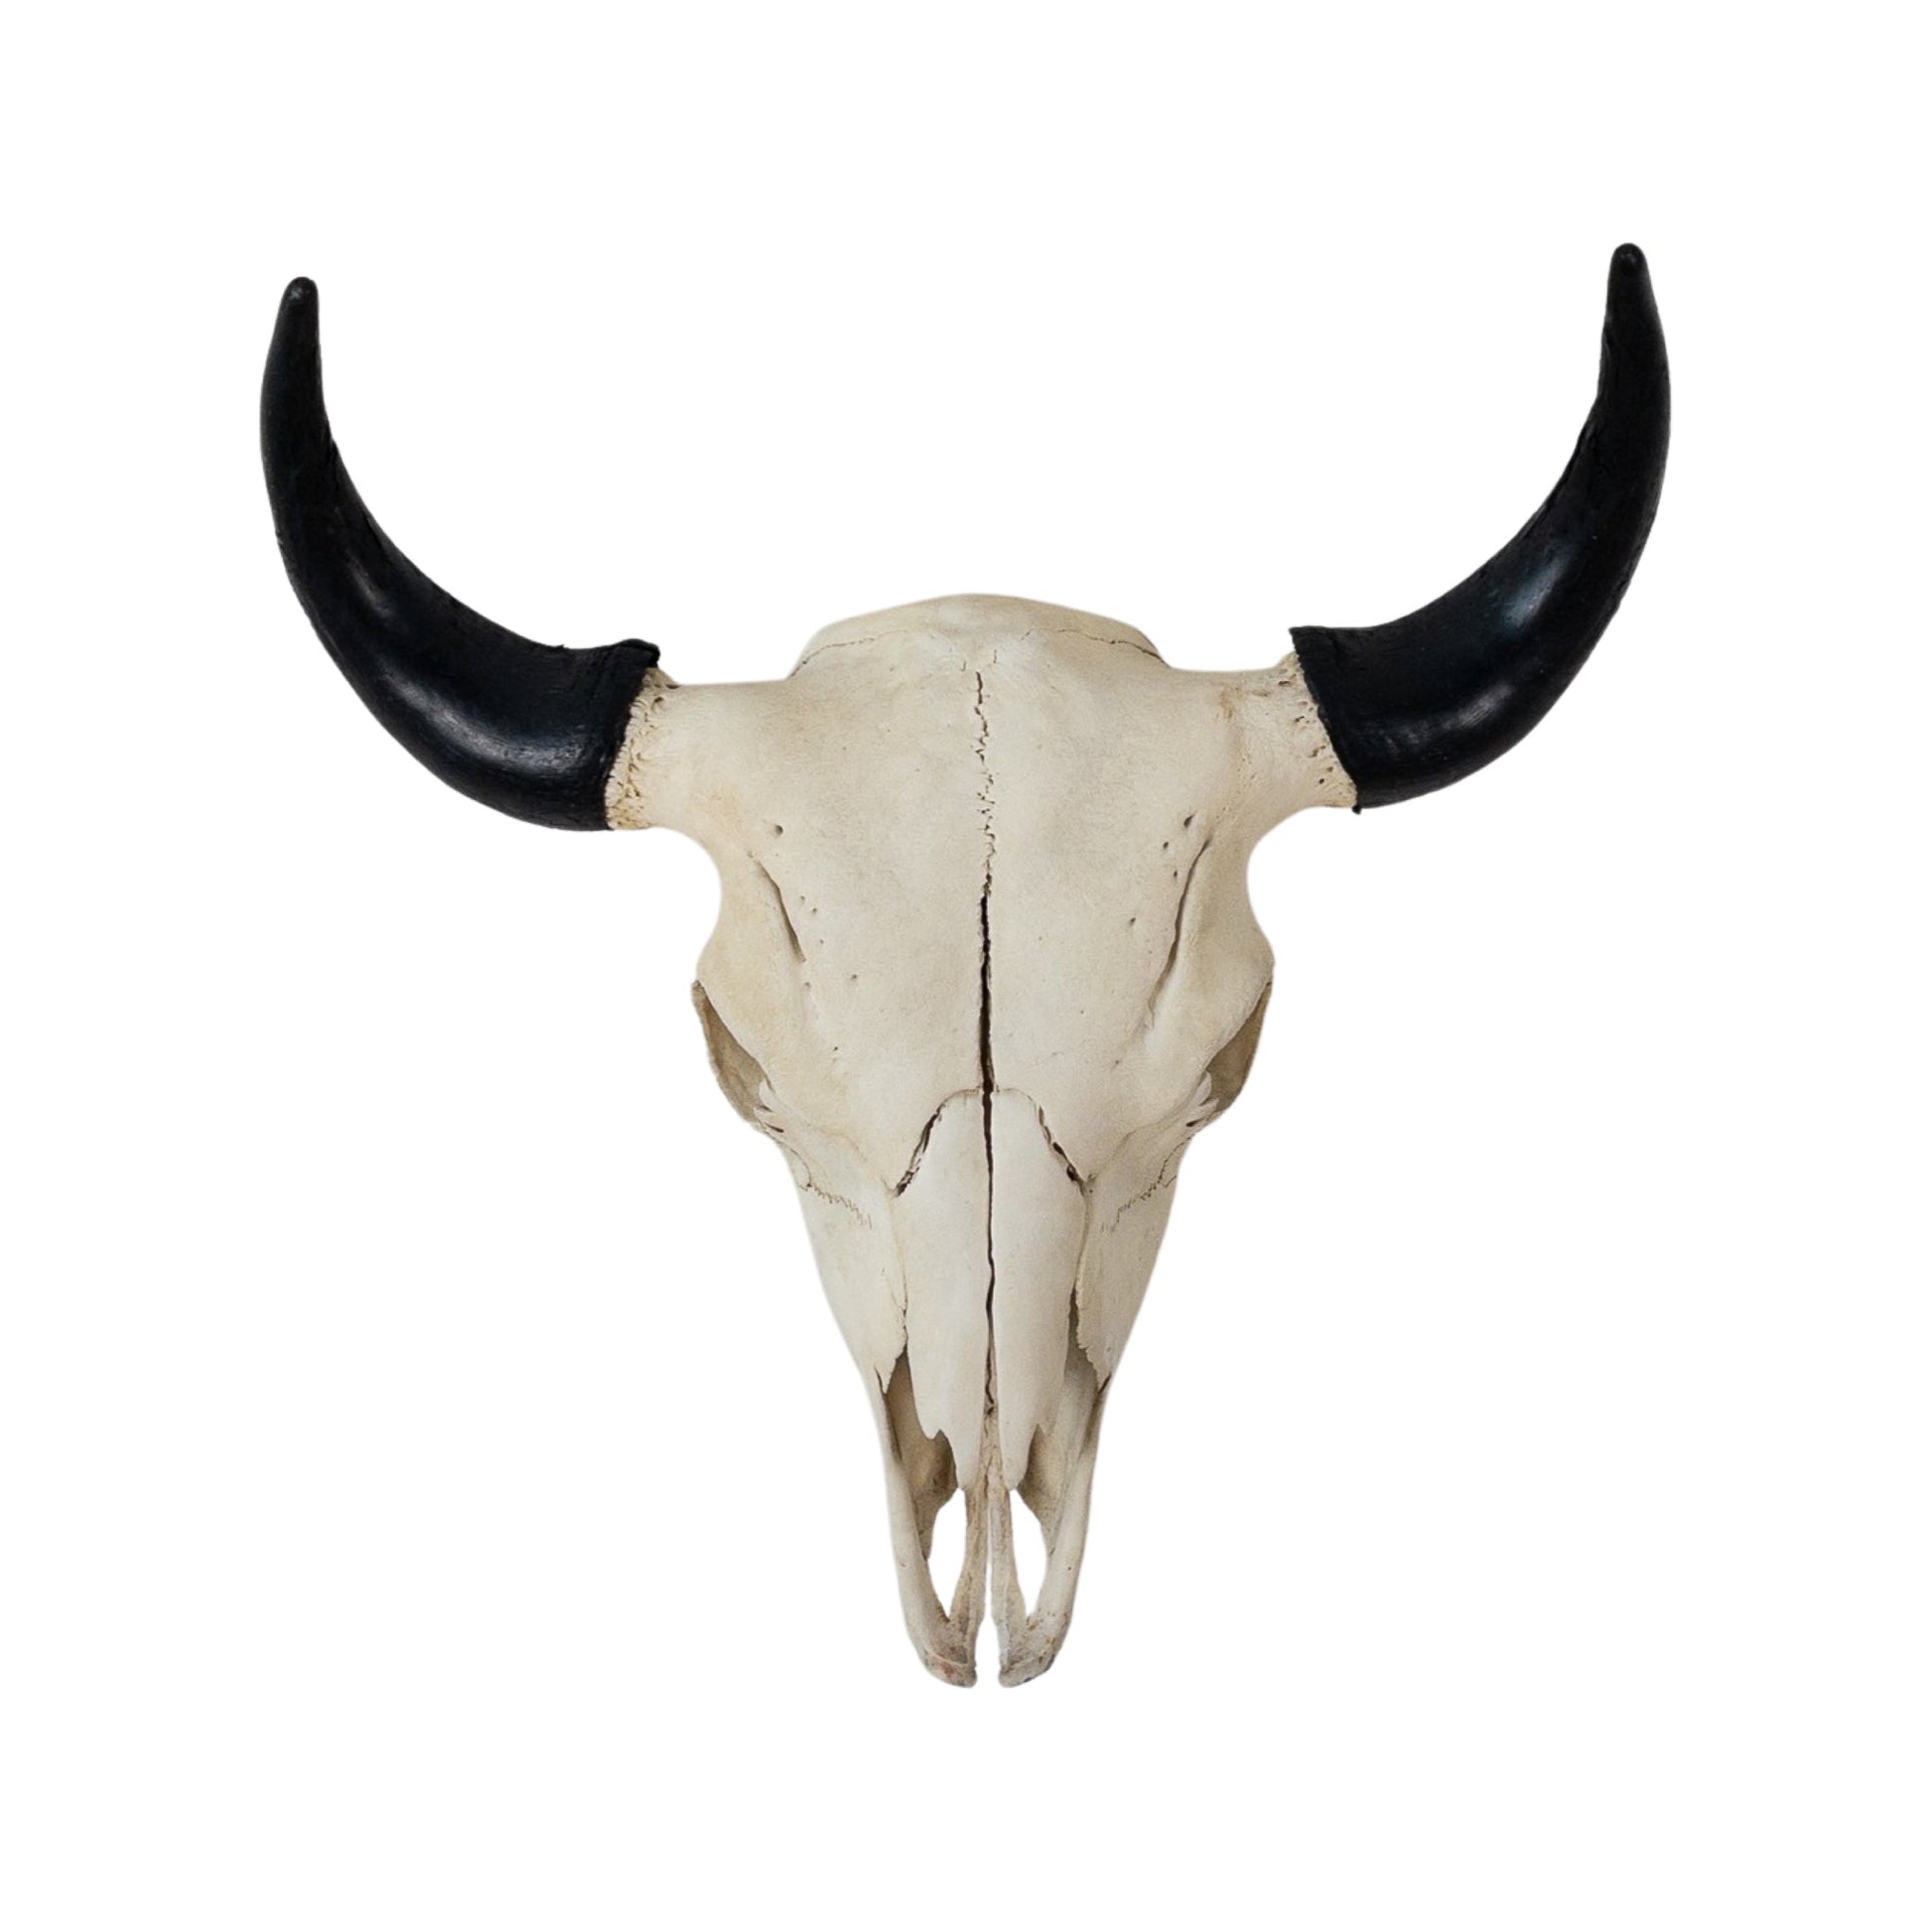 A Home Decor Taxidermy Skull Bisonof Grade Remarkable